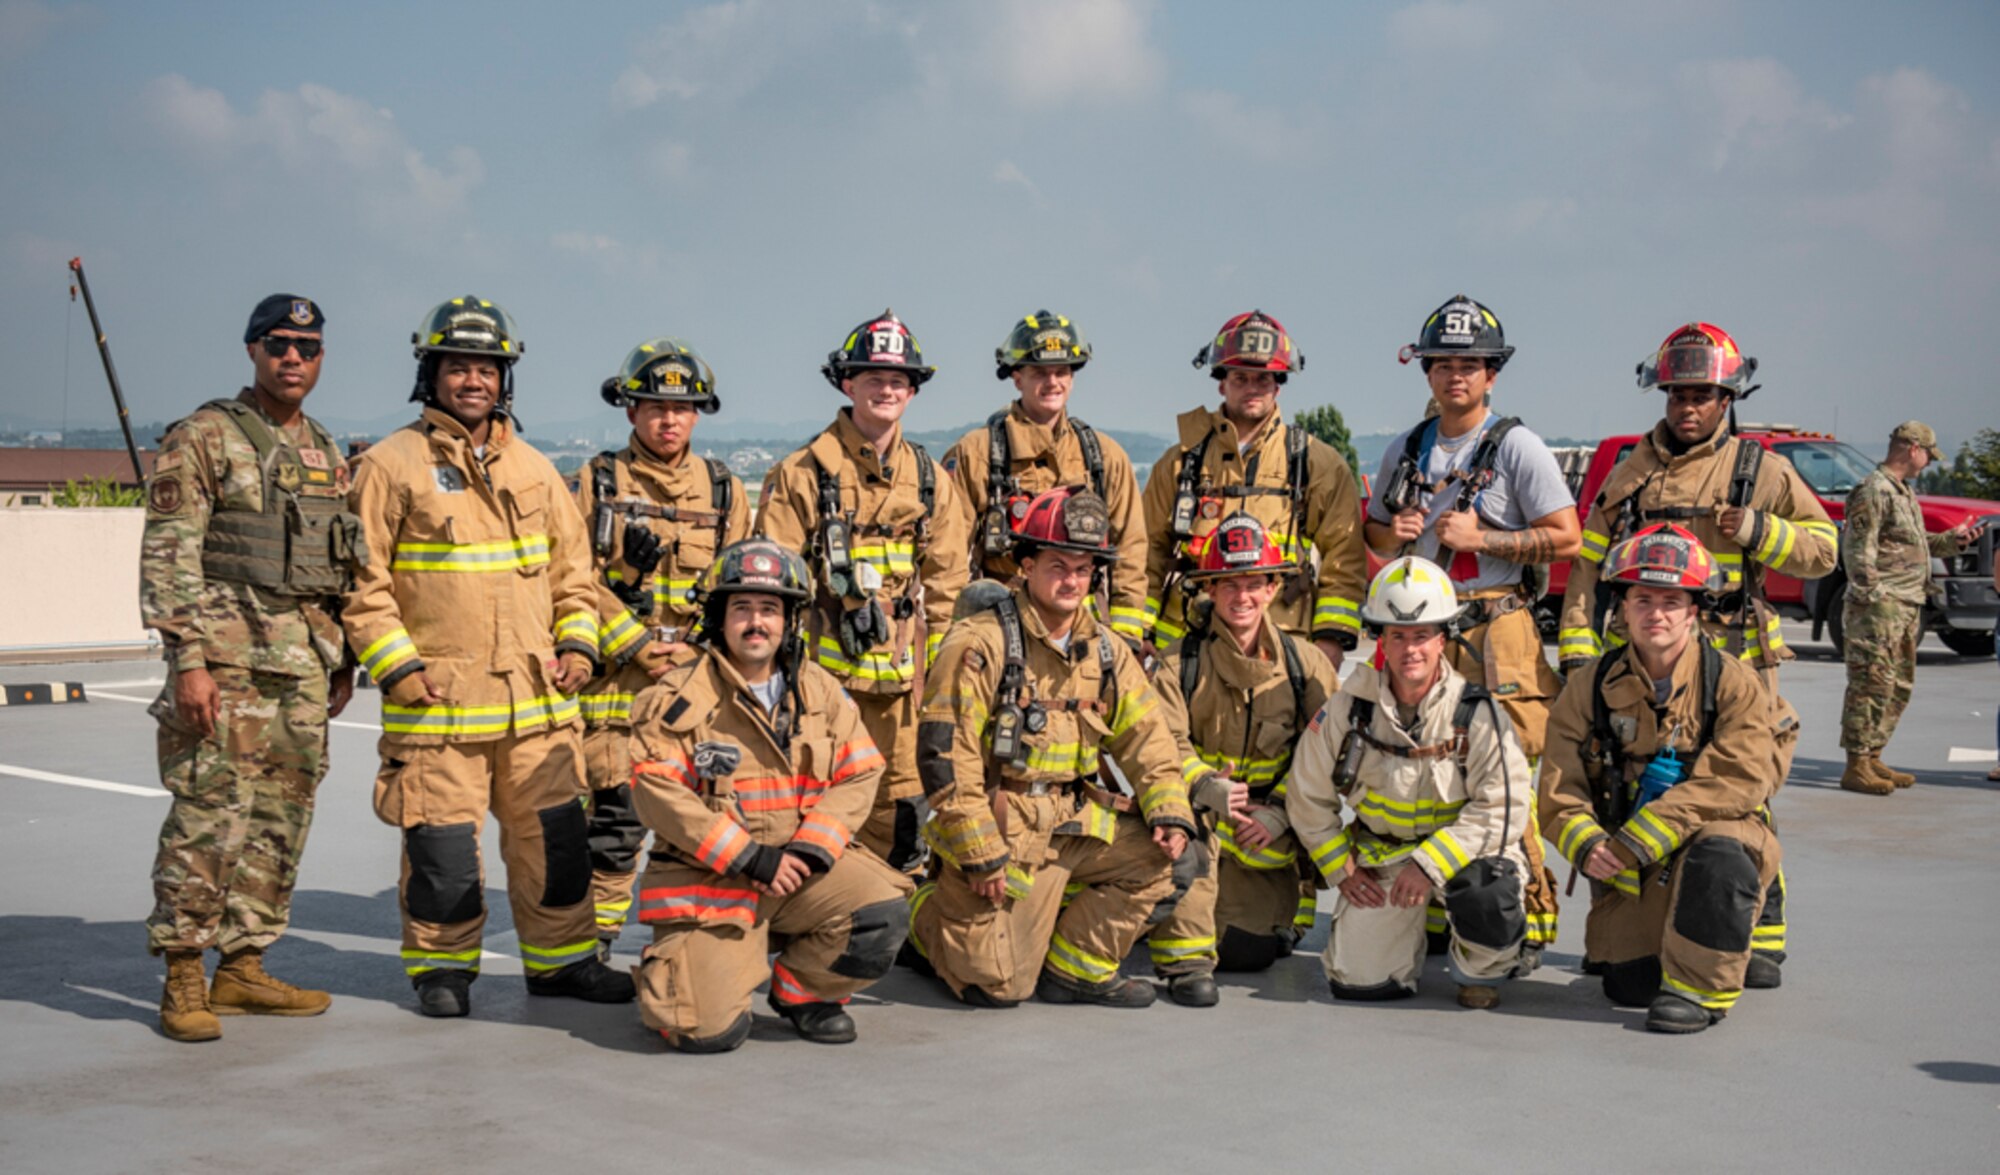 Col. Joshua Wood, 51st Fighter Wing commander, stands with fire fighters assigned to the 51st Civil Engineer Squadron before climbing 110 flights of stairs during a 20th Anniversary 9/11 Remembrance Ceremony at Osan Air Base, Republic of Korea, Sept. 11, 2021